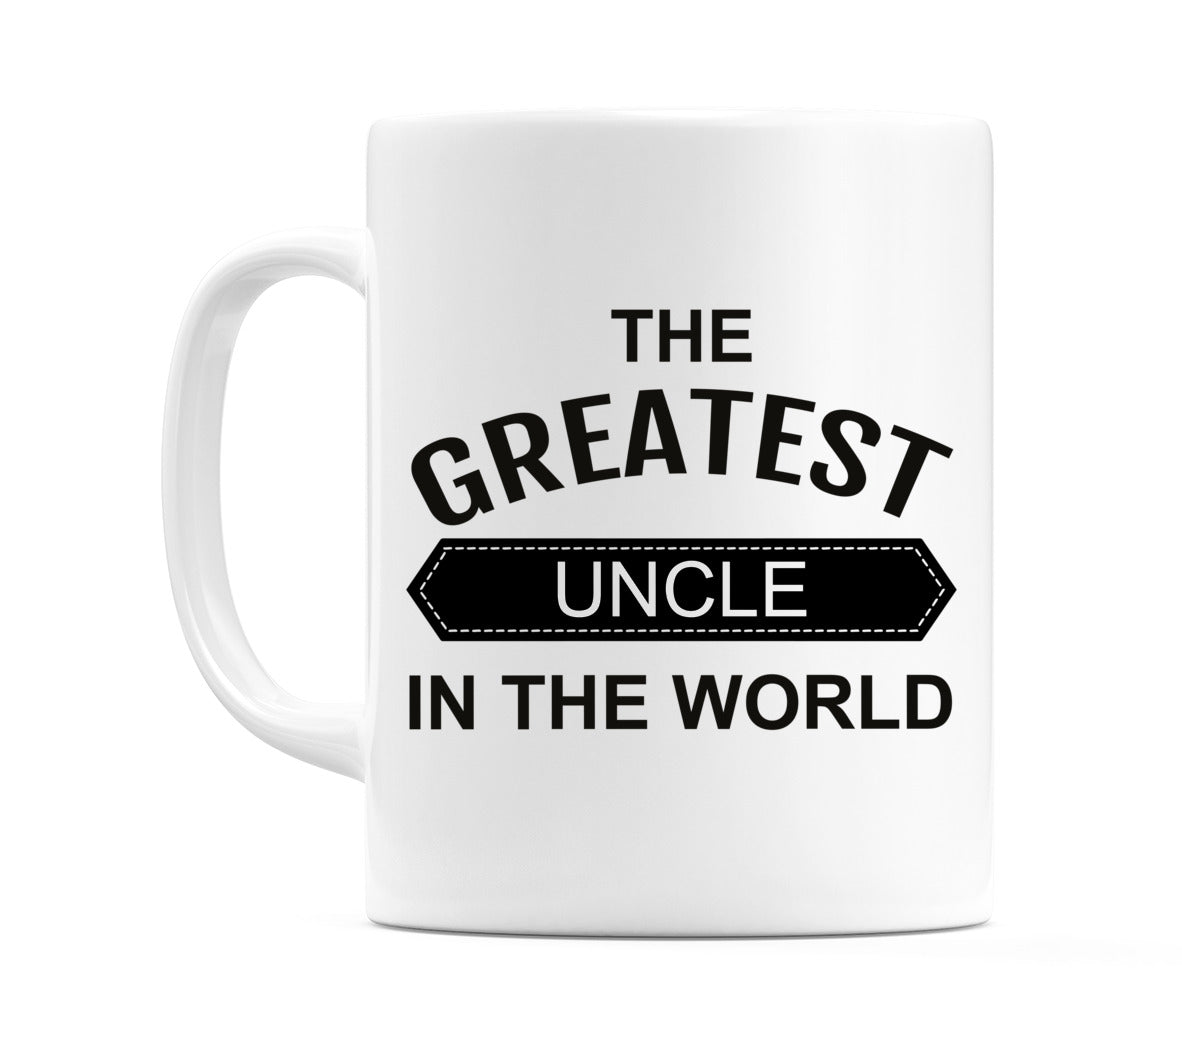 The Greatest Uncle in the World Mug